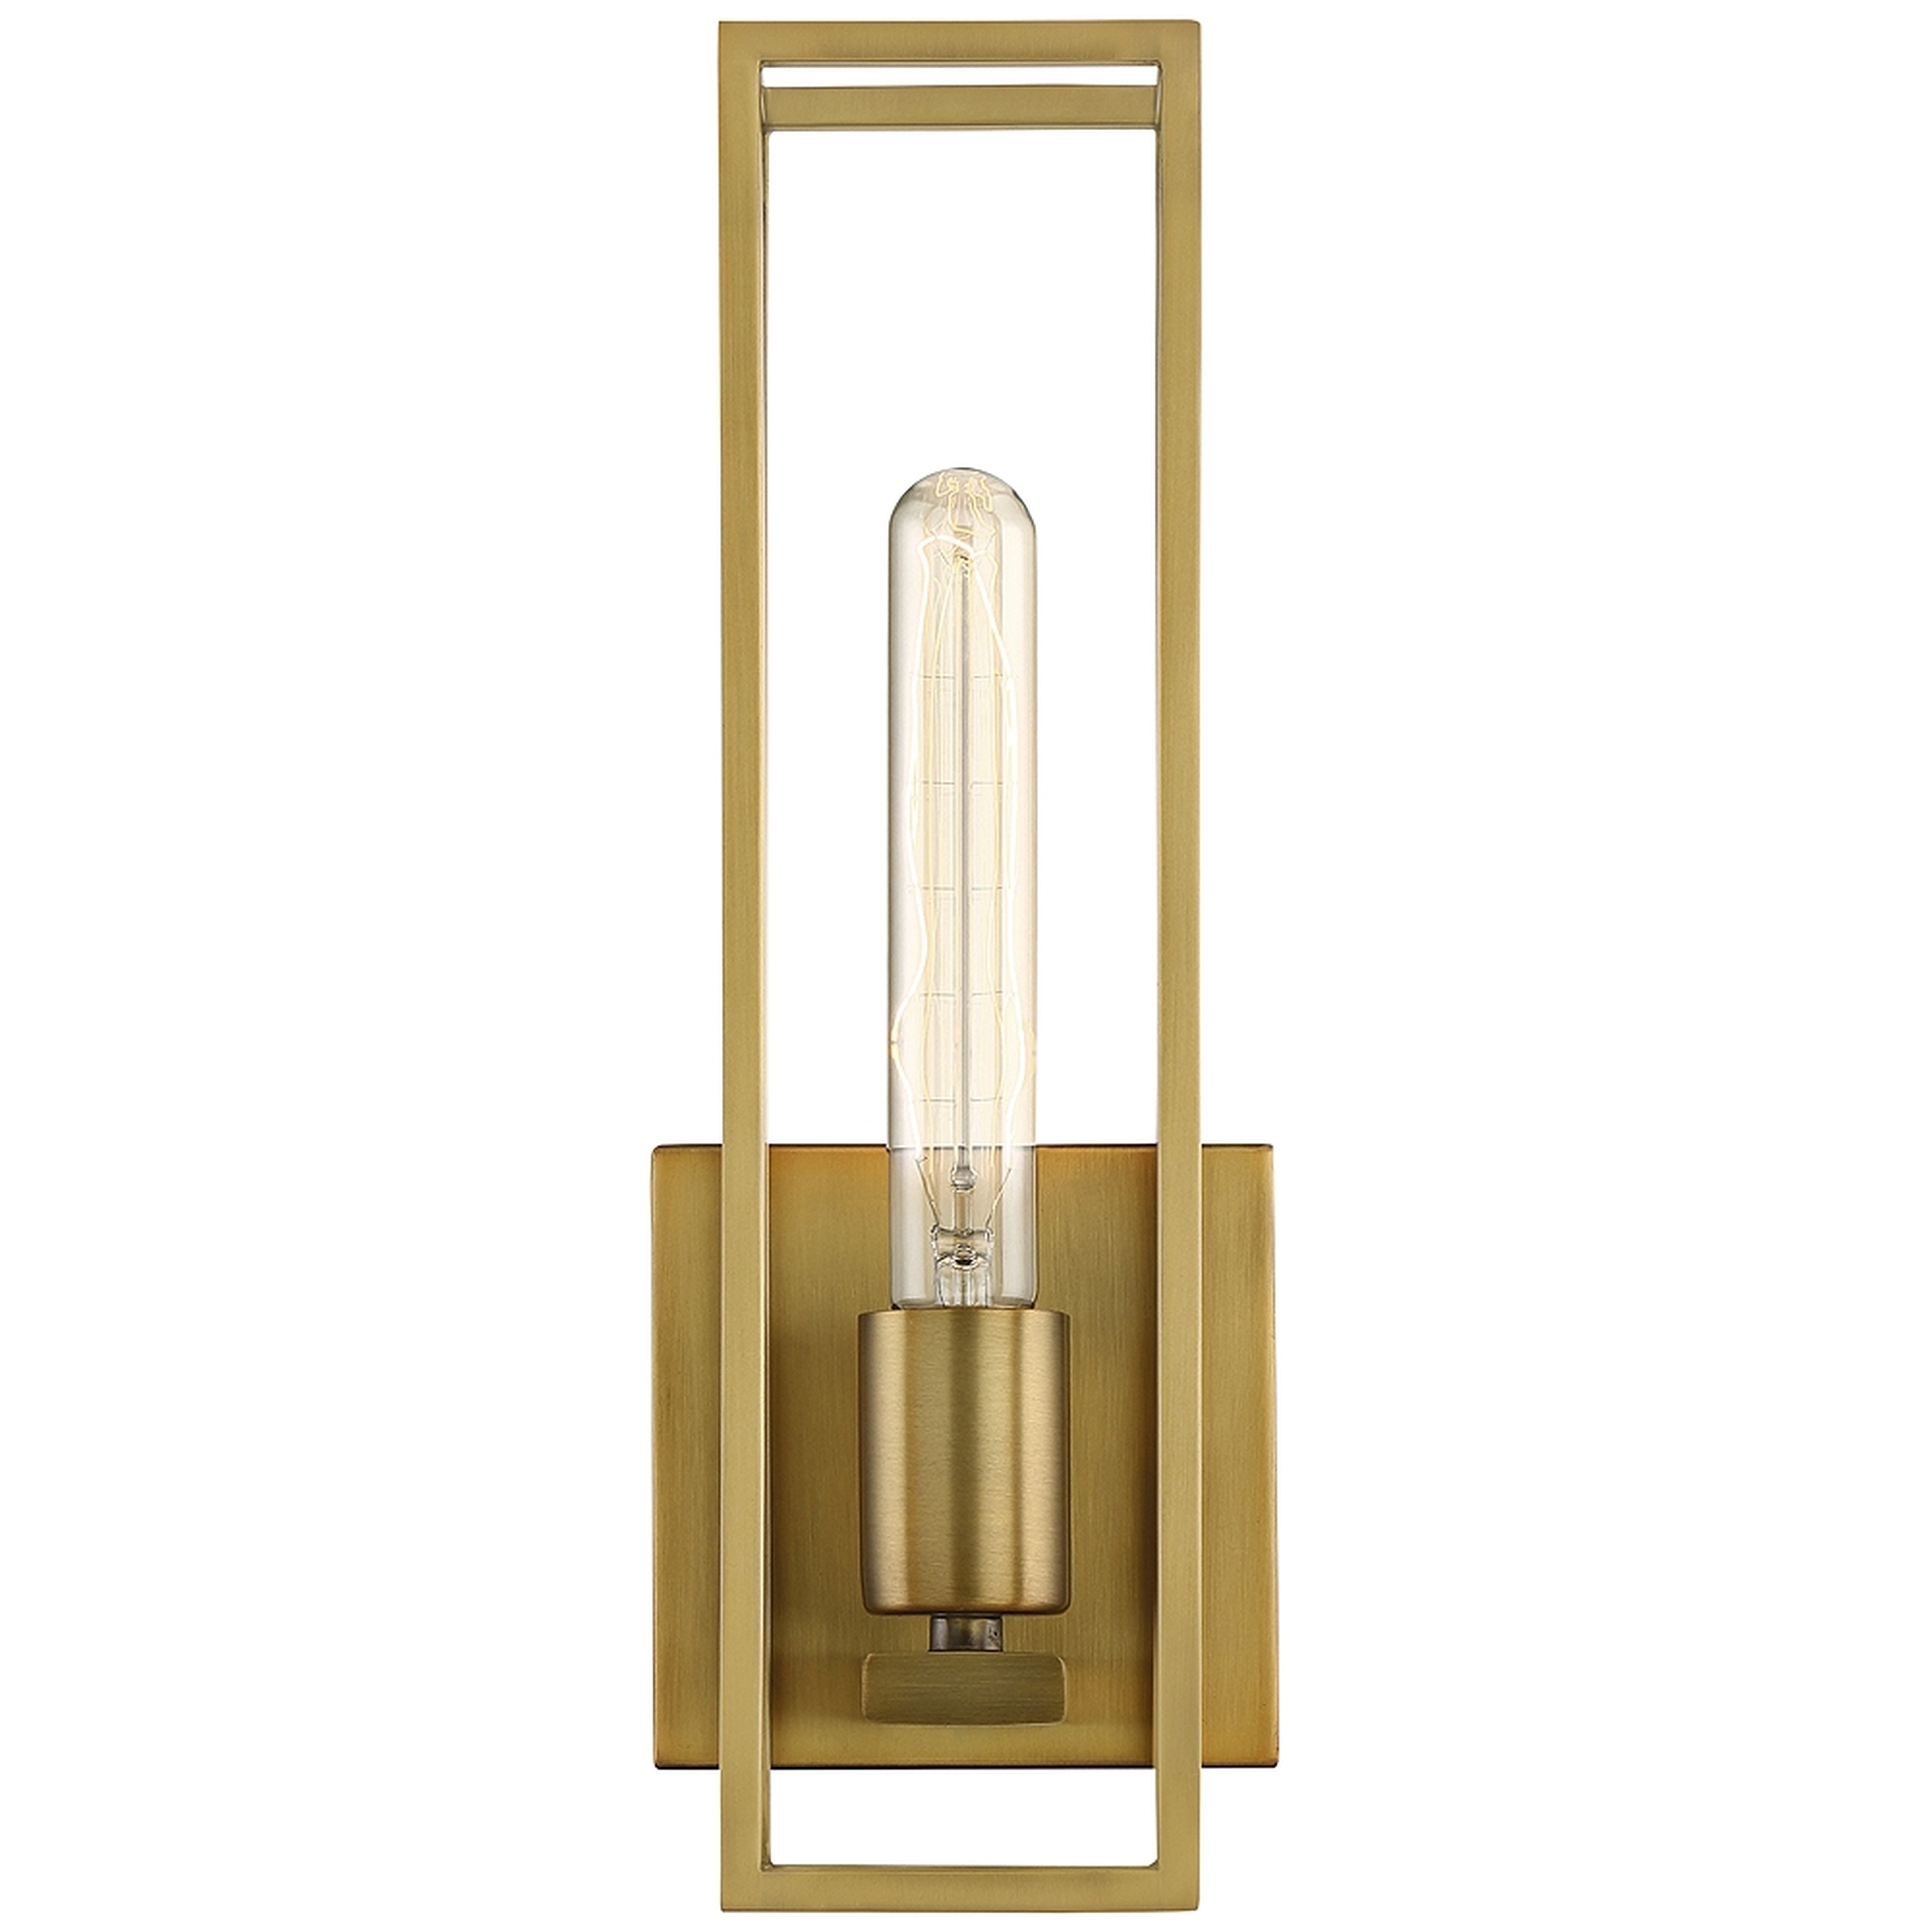 Quoizel Leighton 13 3/4" High Weathered Brass Wall Sconce - Style # 83G73 - Lamps Plus